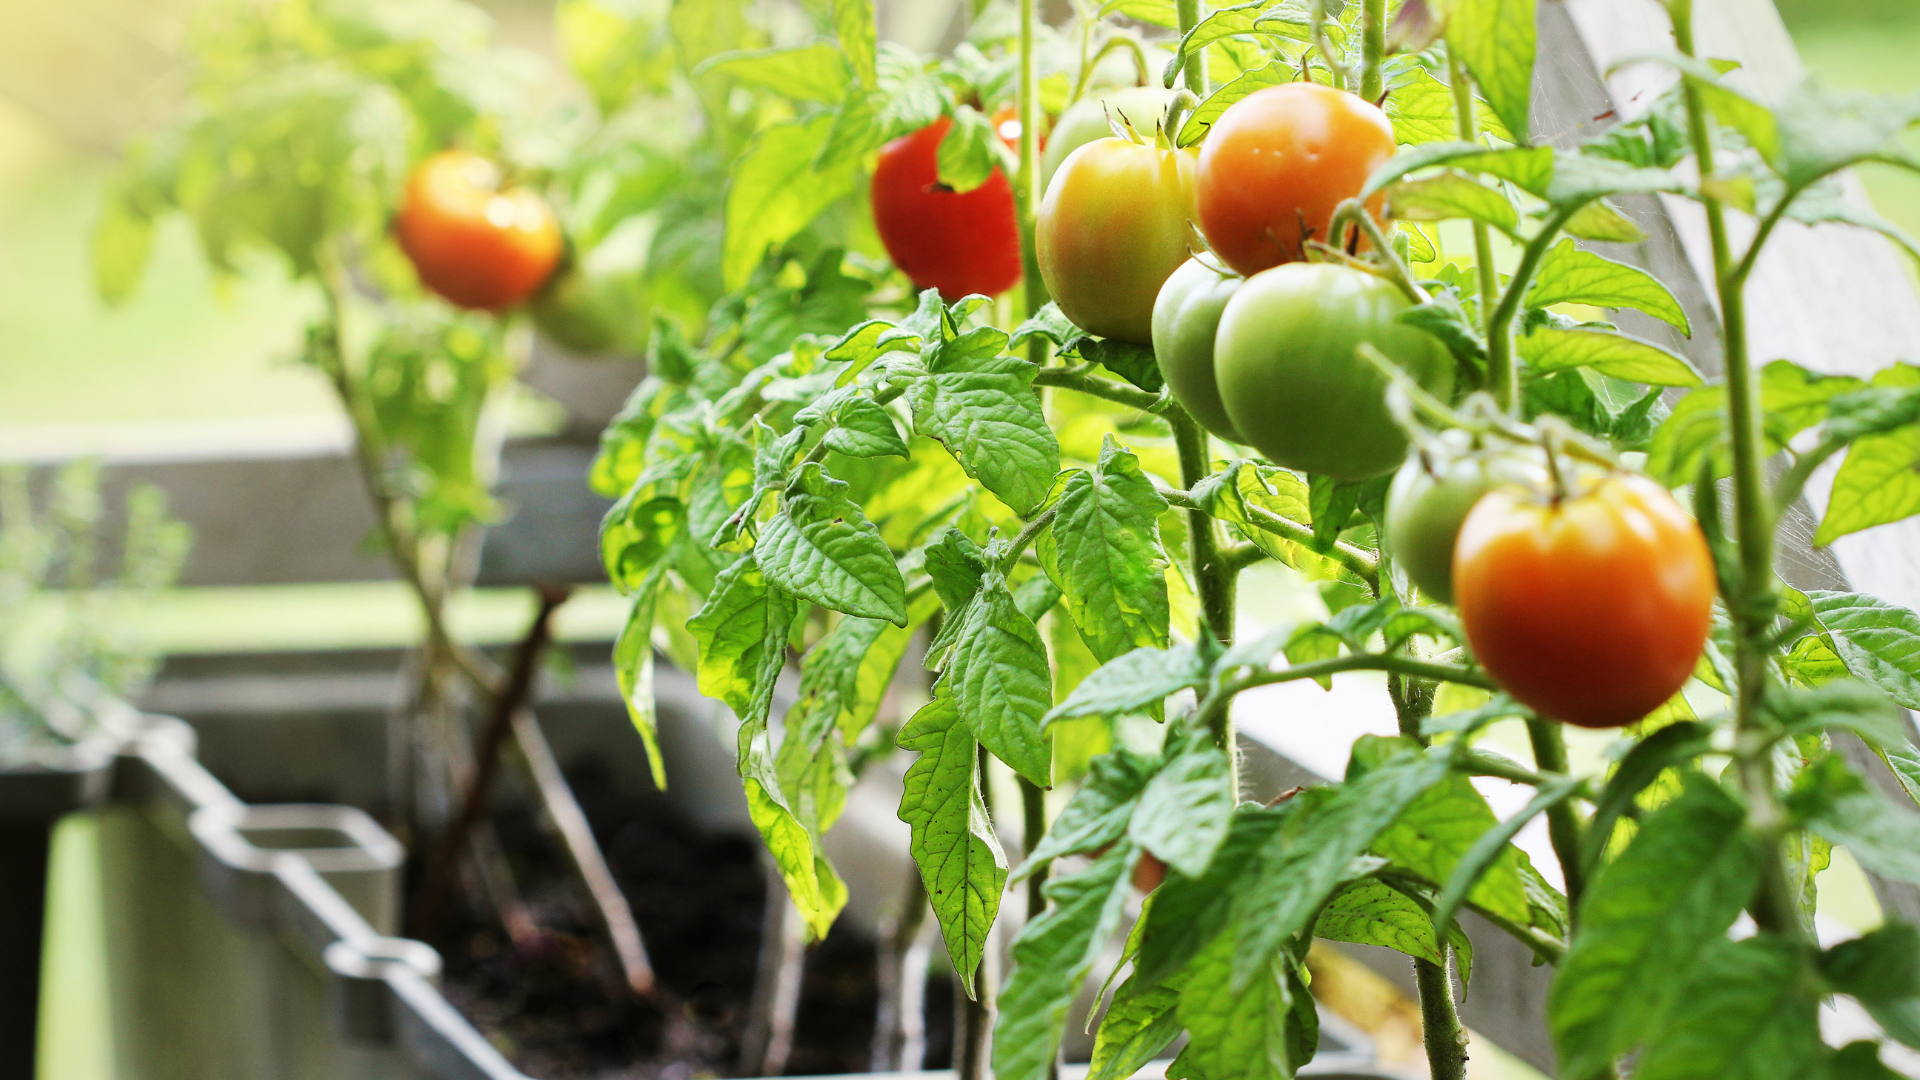  make a garden to fight the food shortage in 2023